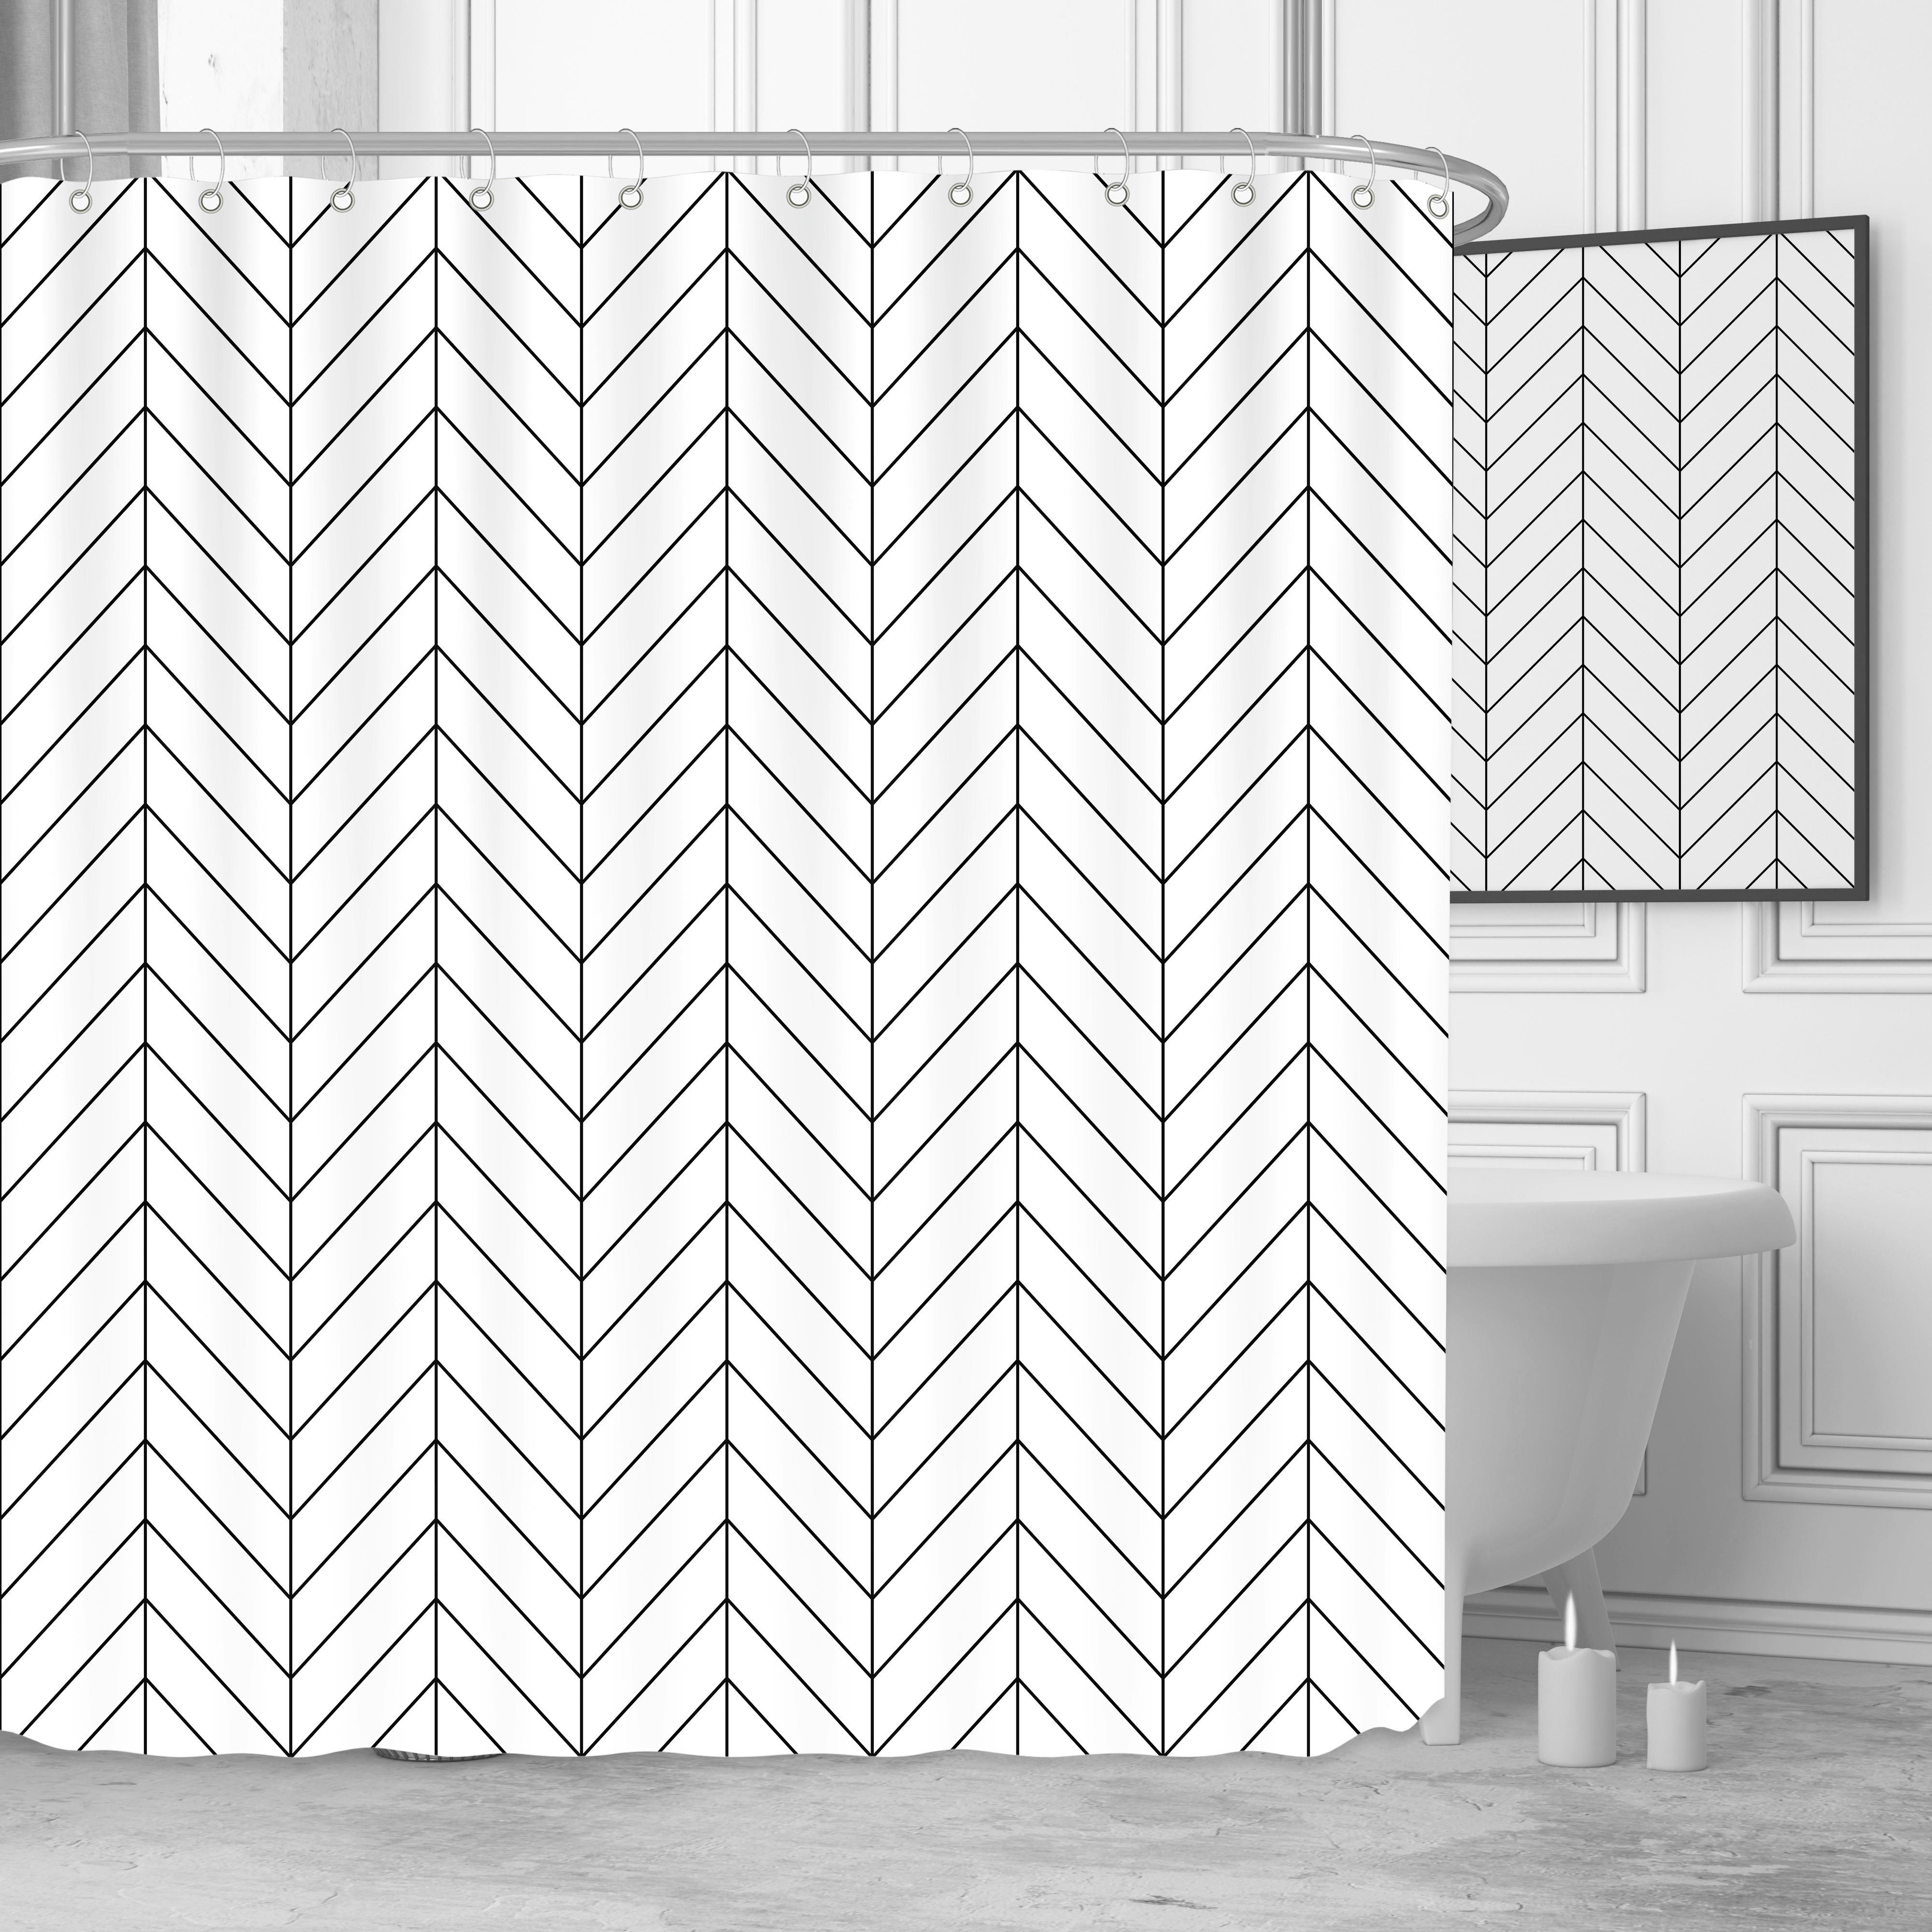 Geometric Lines Black and White Shower Curtain 